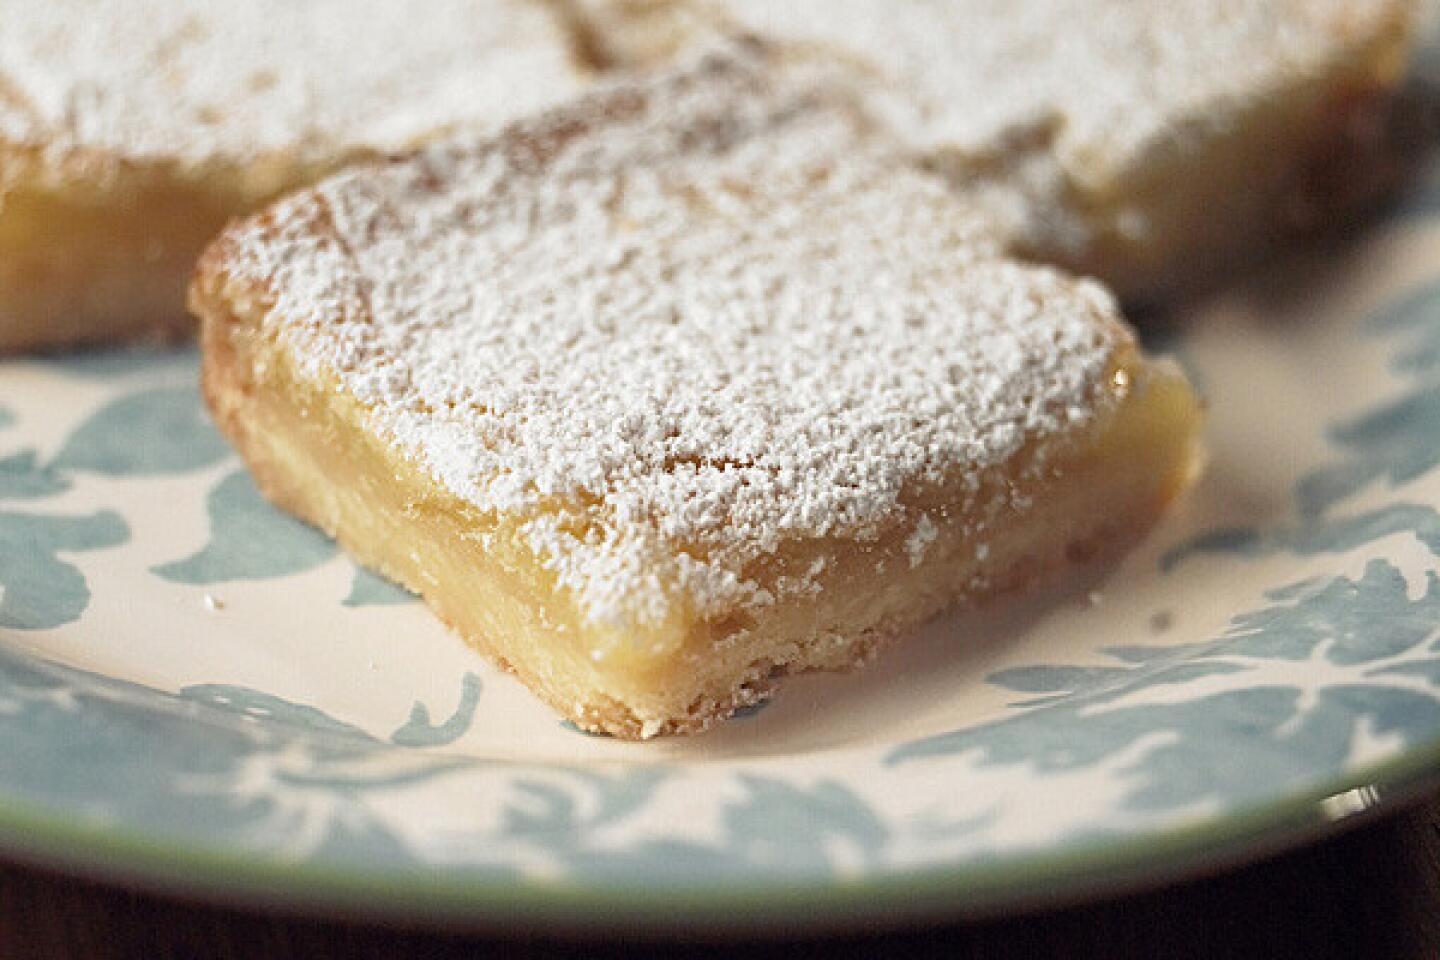 Fresh lemon curd is slathered over a rich shortbread crust. Make them a day ahead of time. Recipe: Joan's on Third's lemon bars